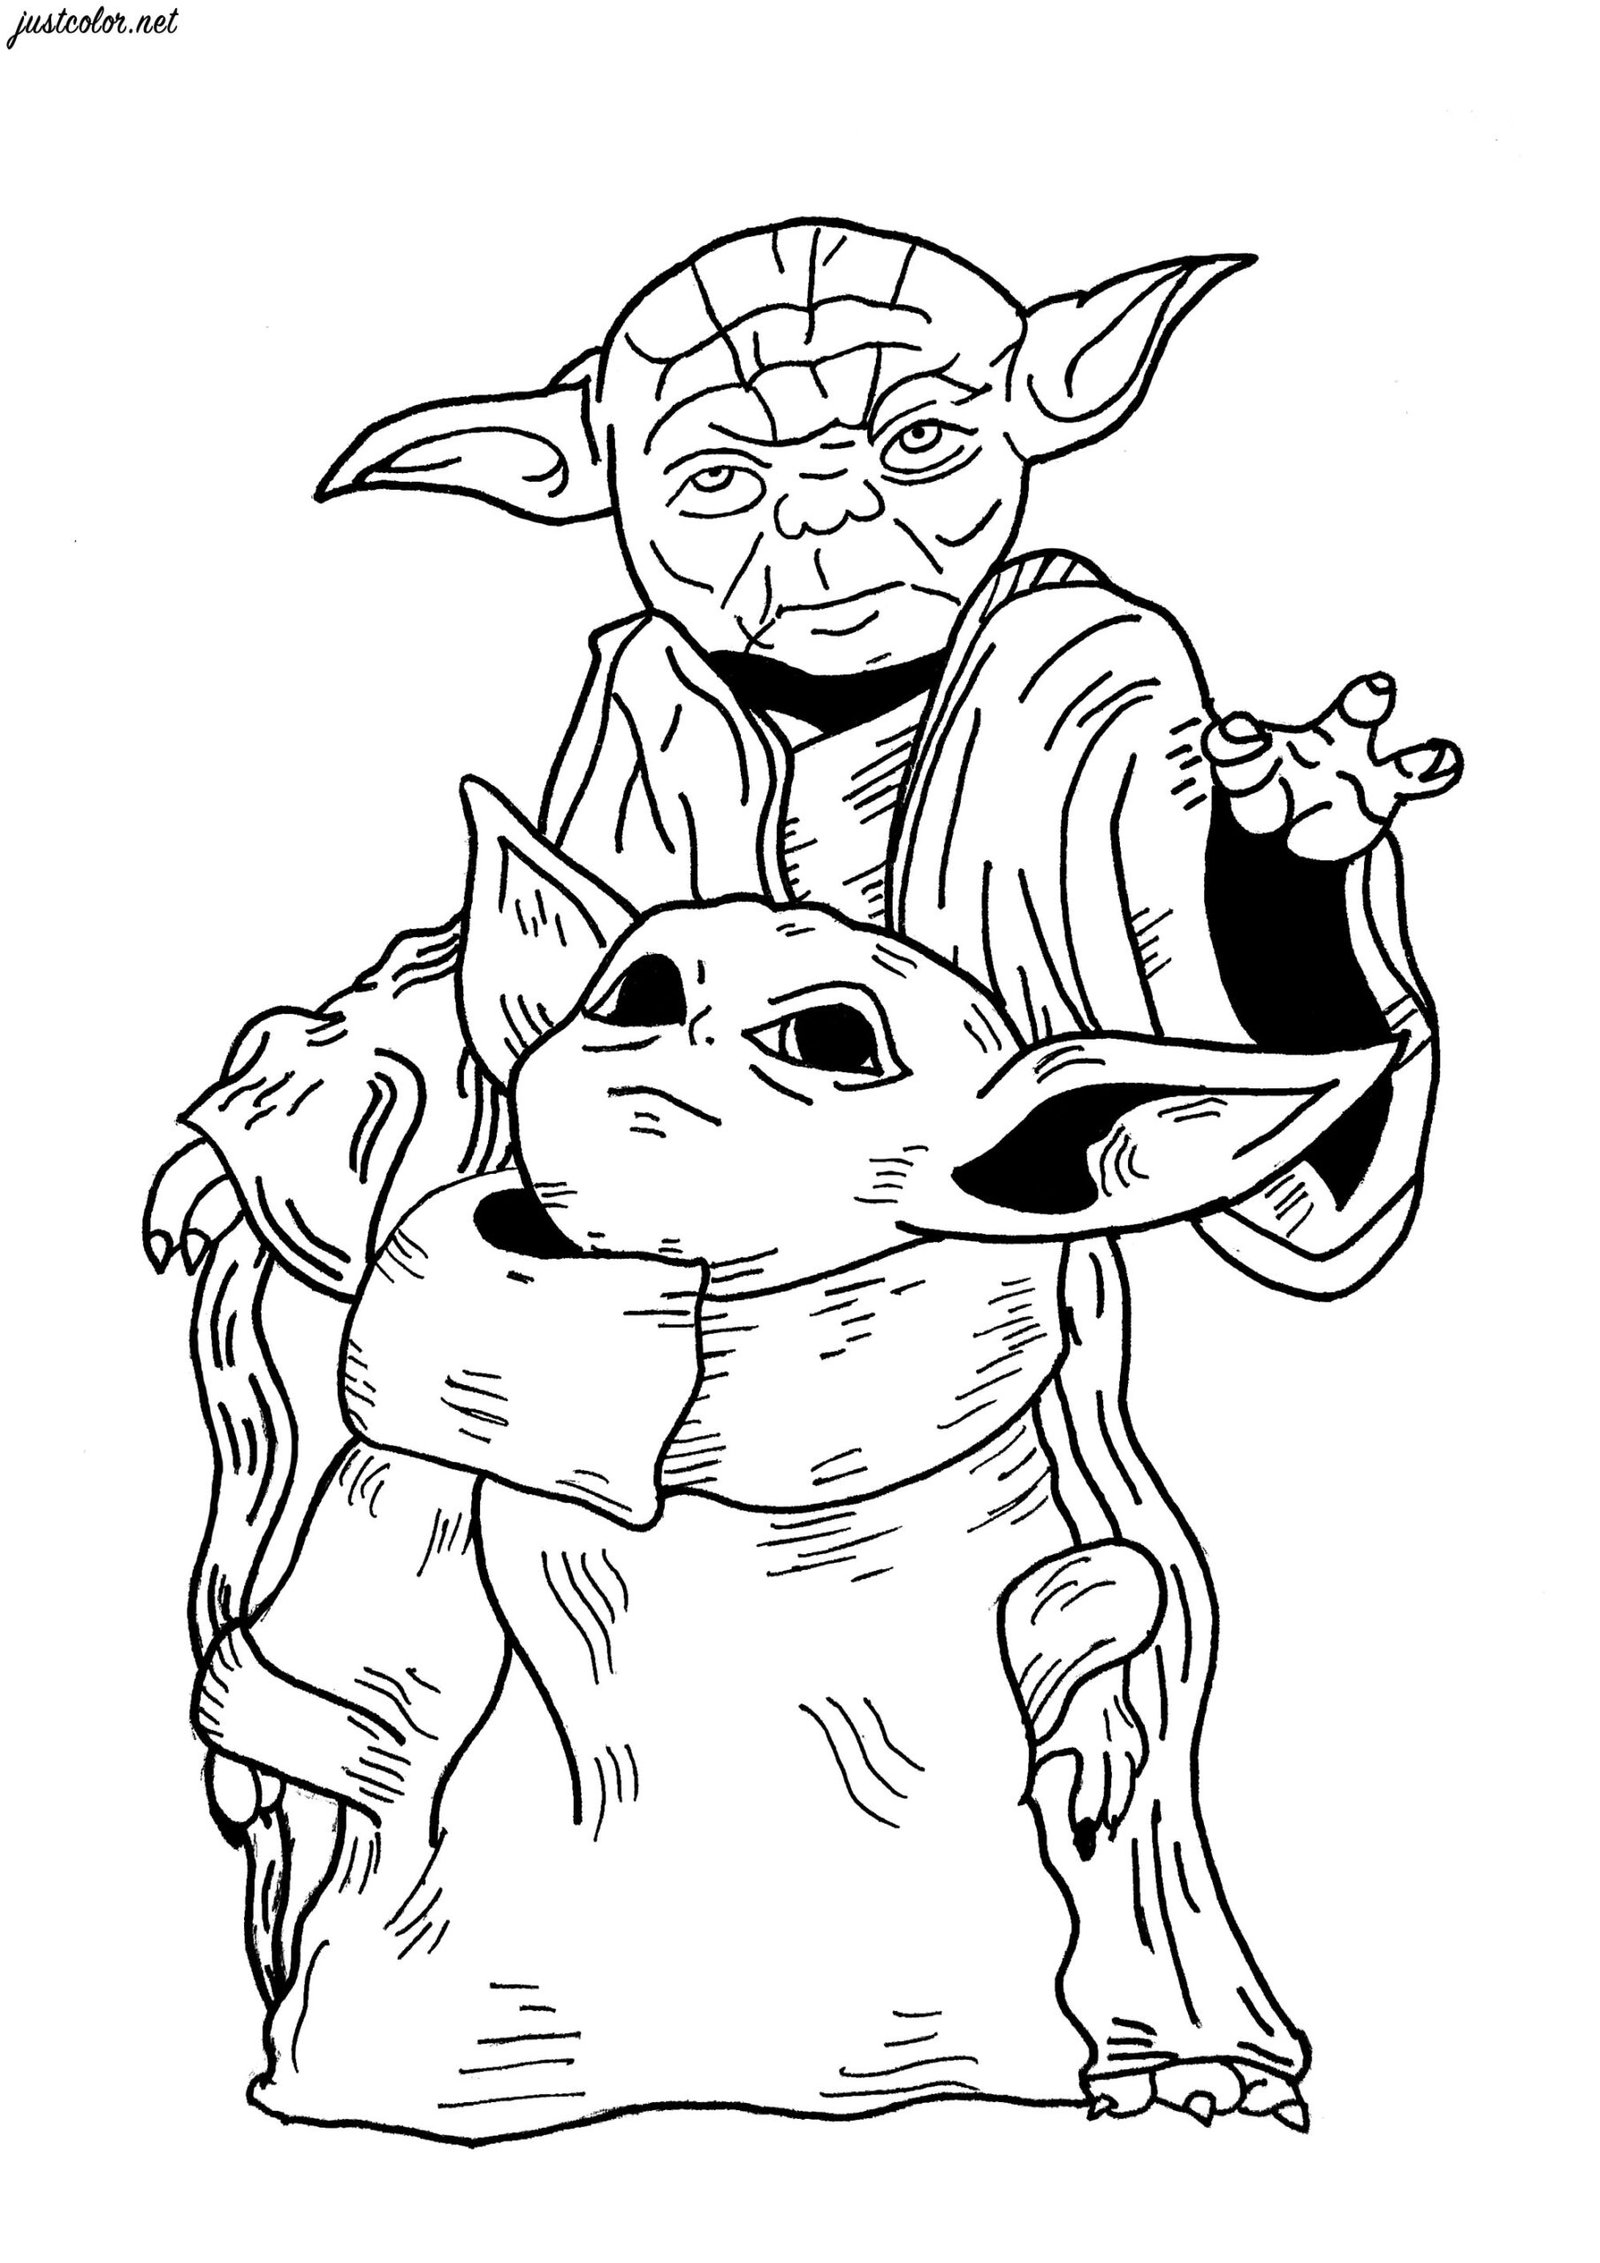 lego star wars yoda coloring pages